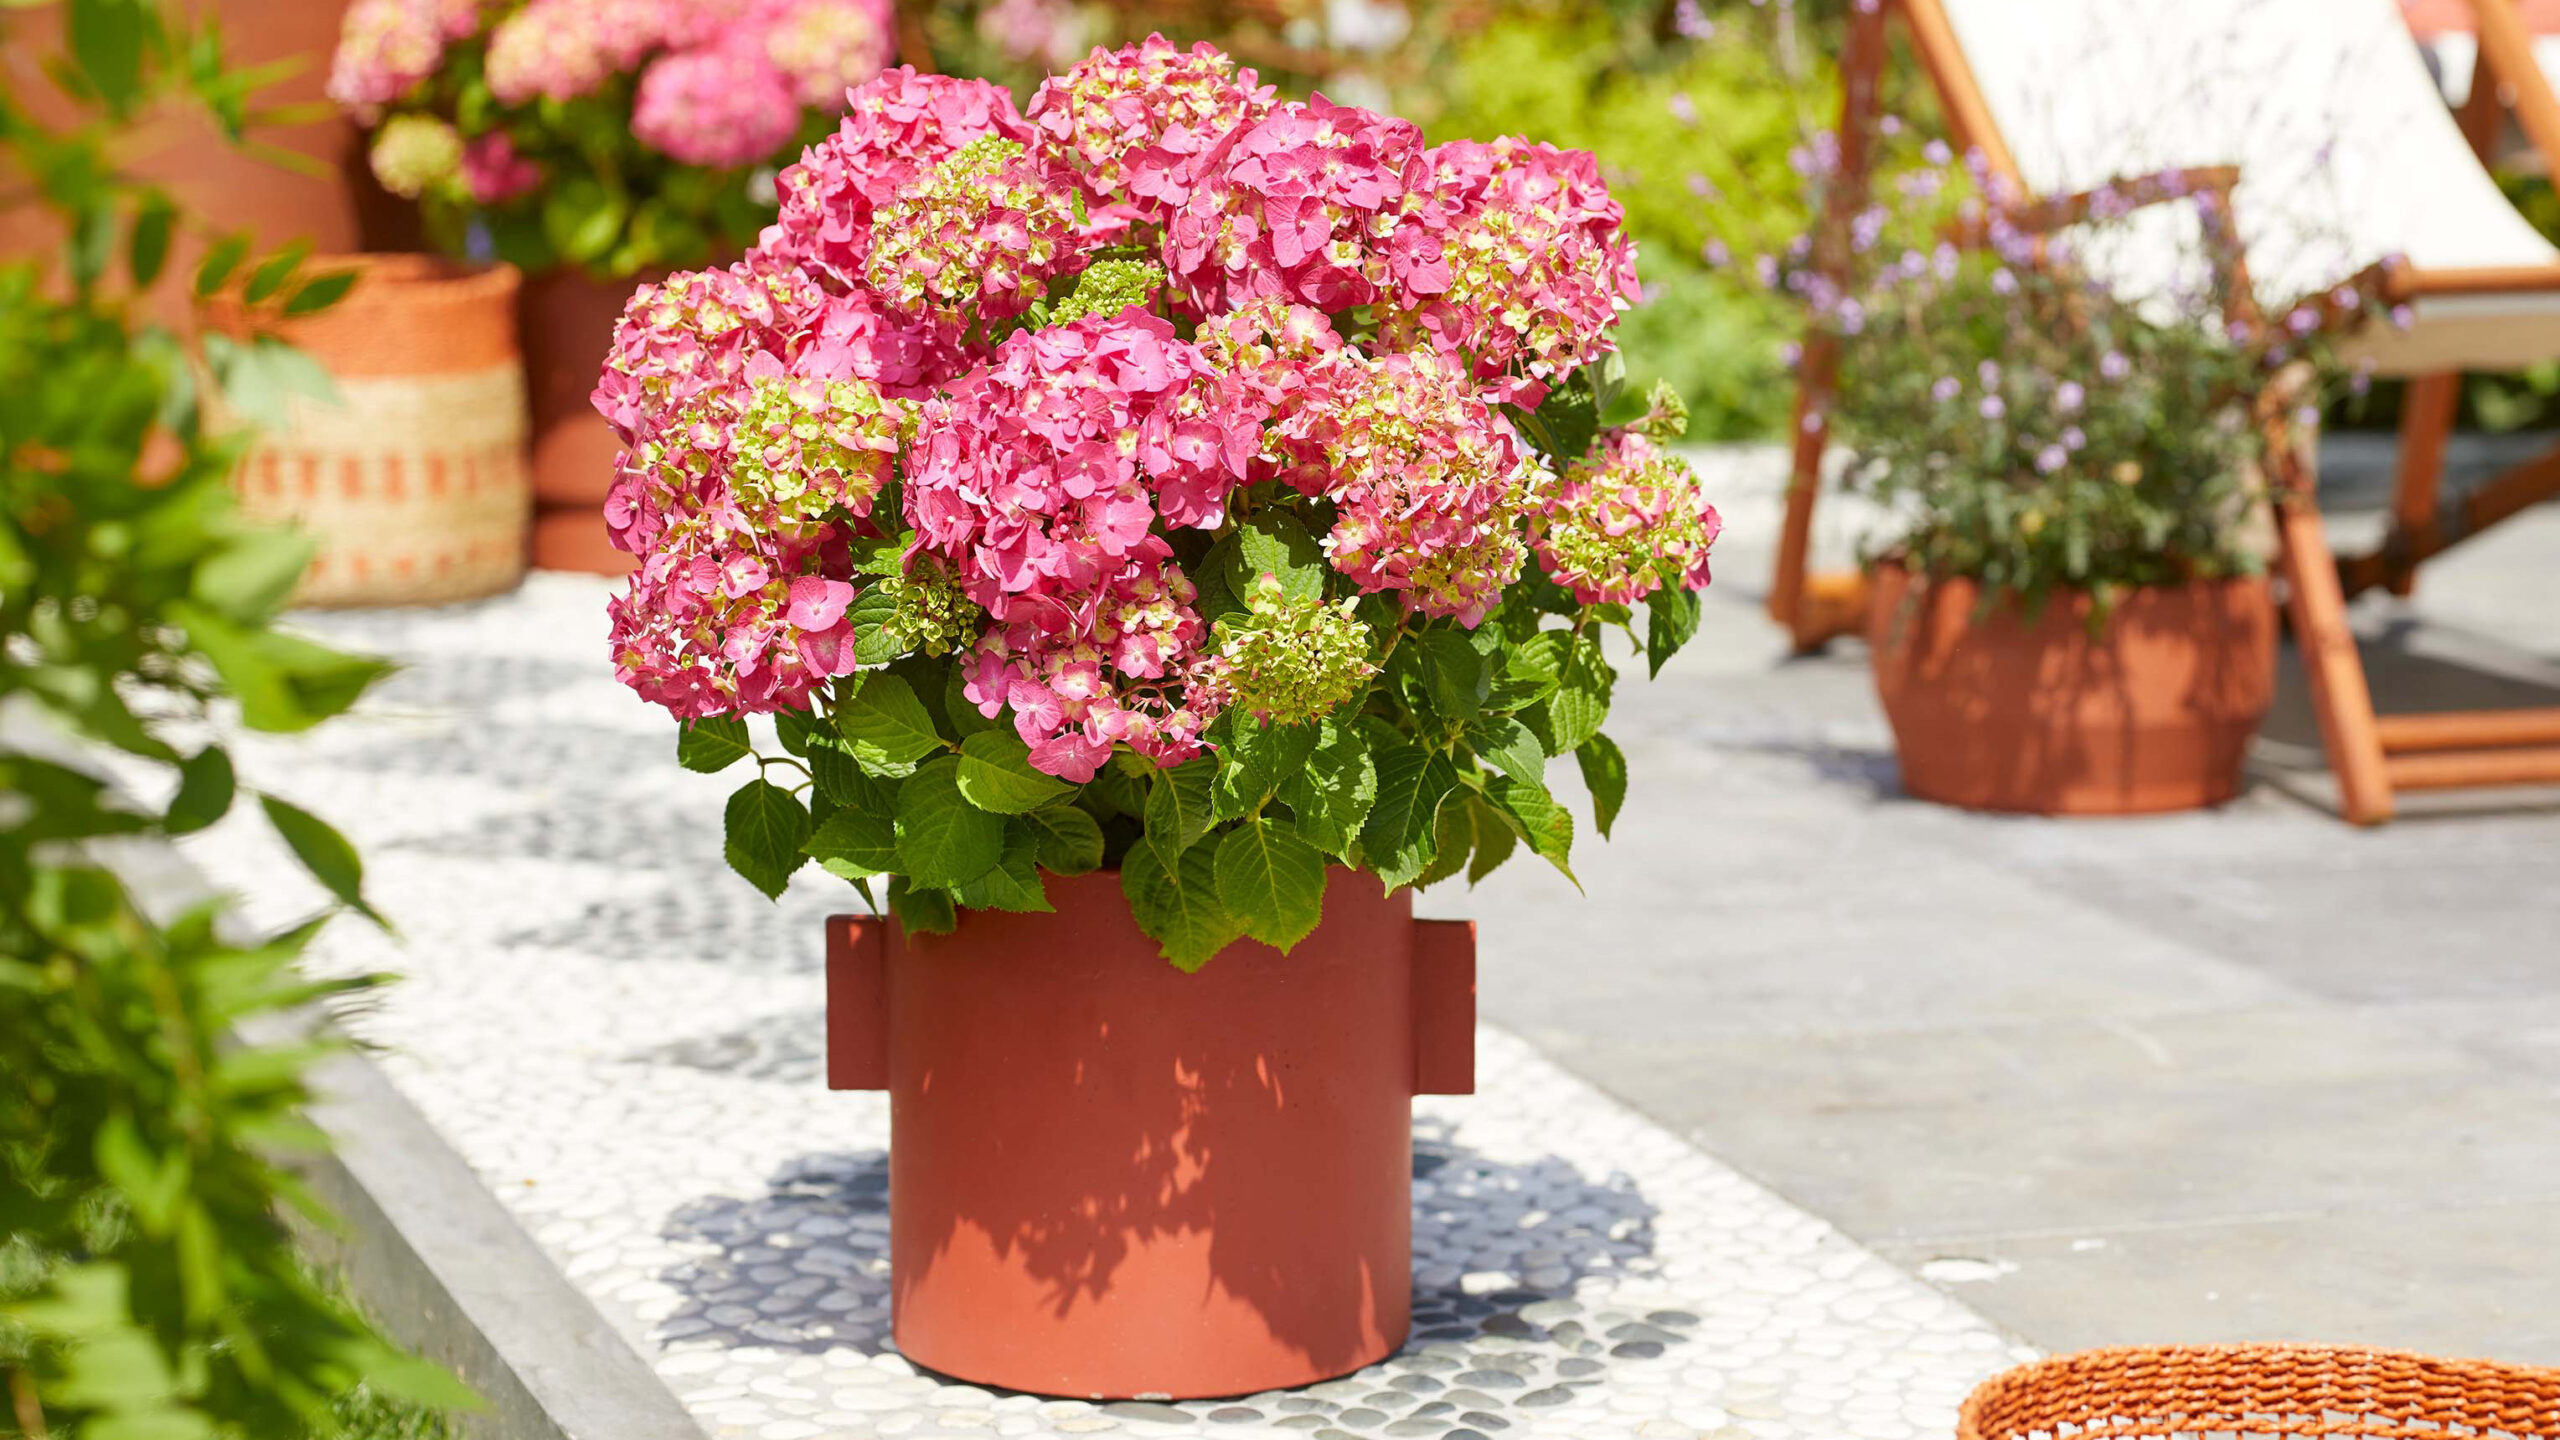 Image of Endless Summer Hydrangea in a container on a patio